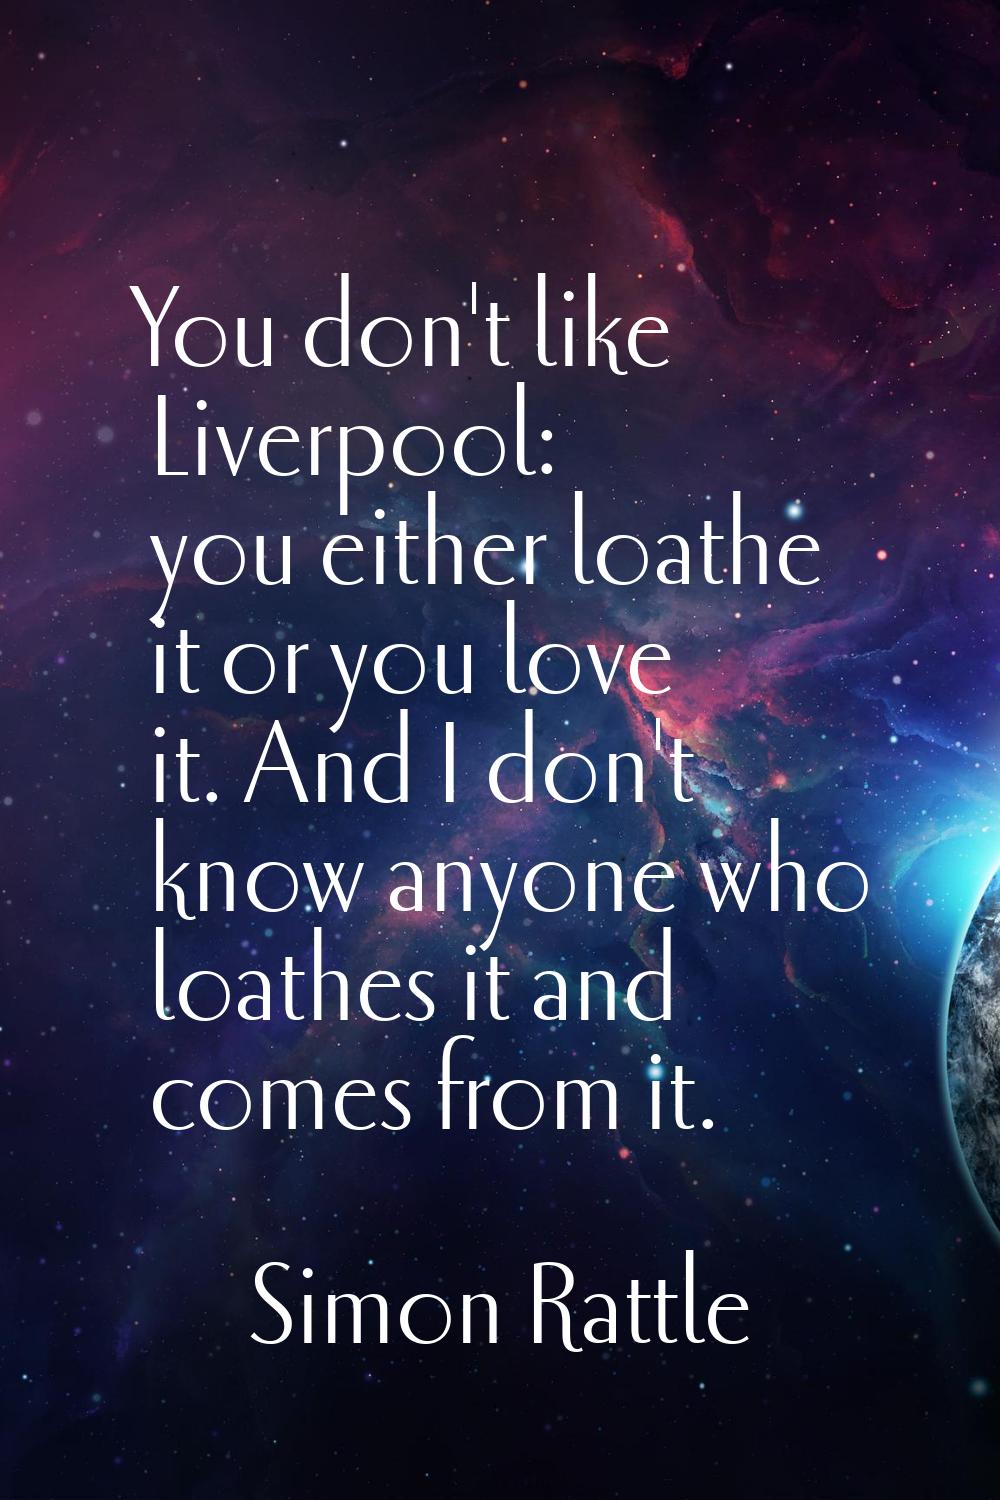 You don't like Liverpool: you either loathe it or you love it. And I don't know anyone who loathes 